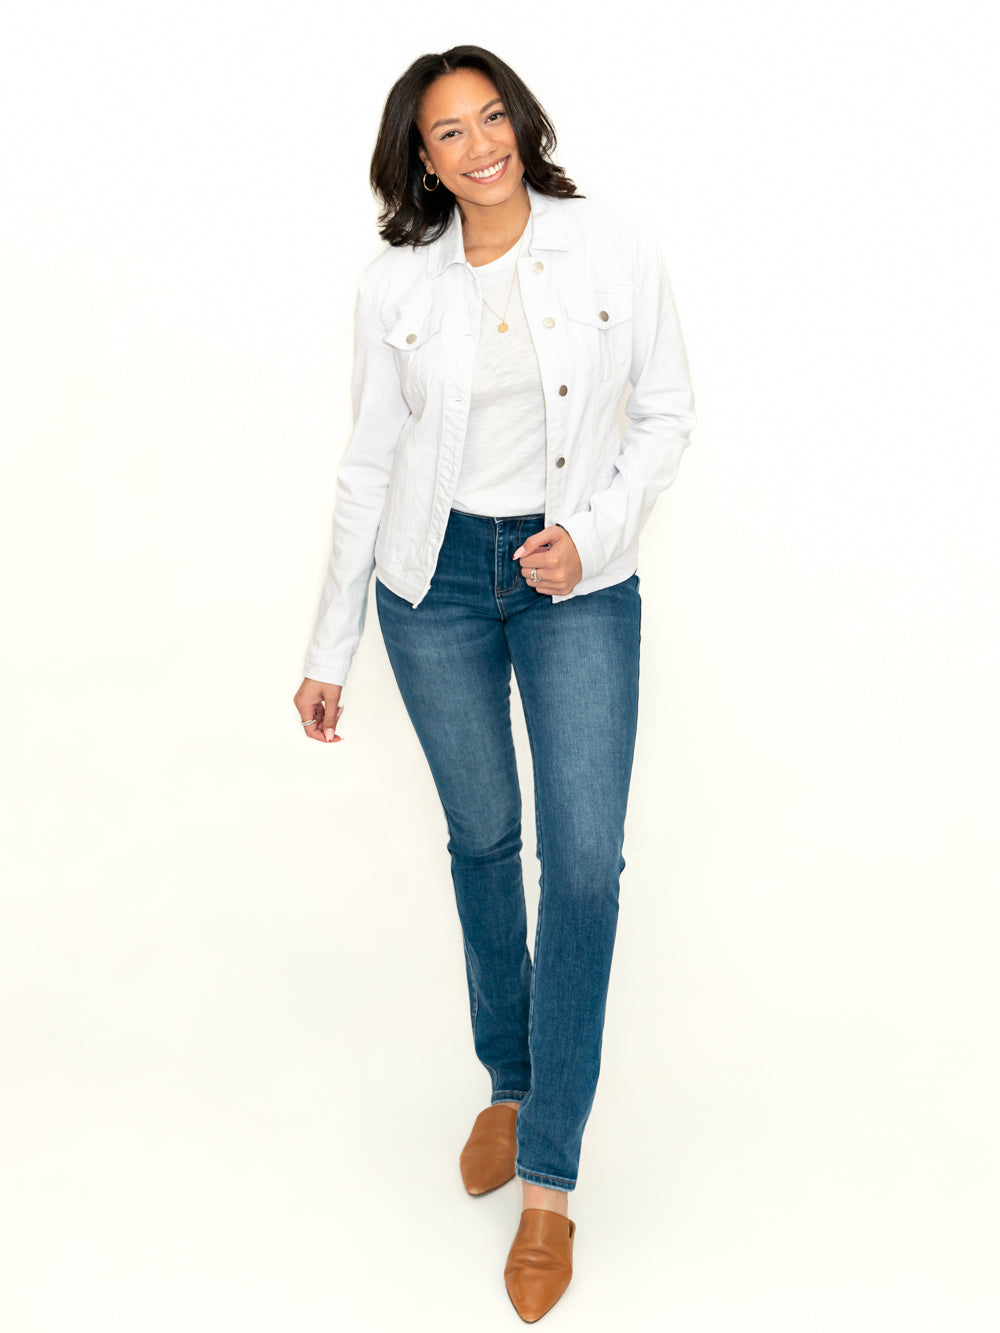 Tall Jeans and Denim Jackets, Jeans for Tall Women